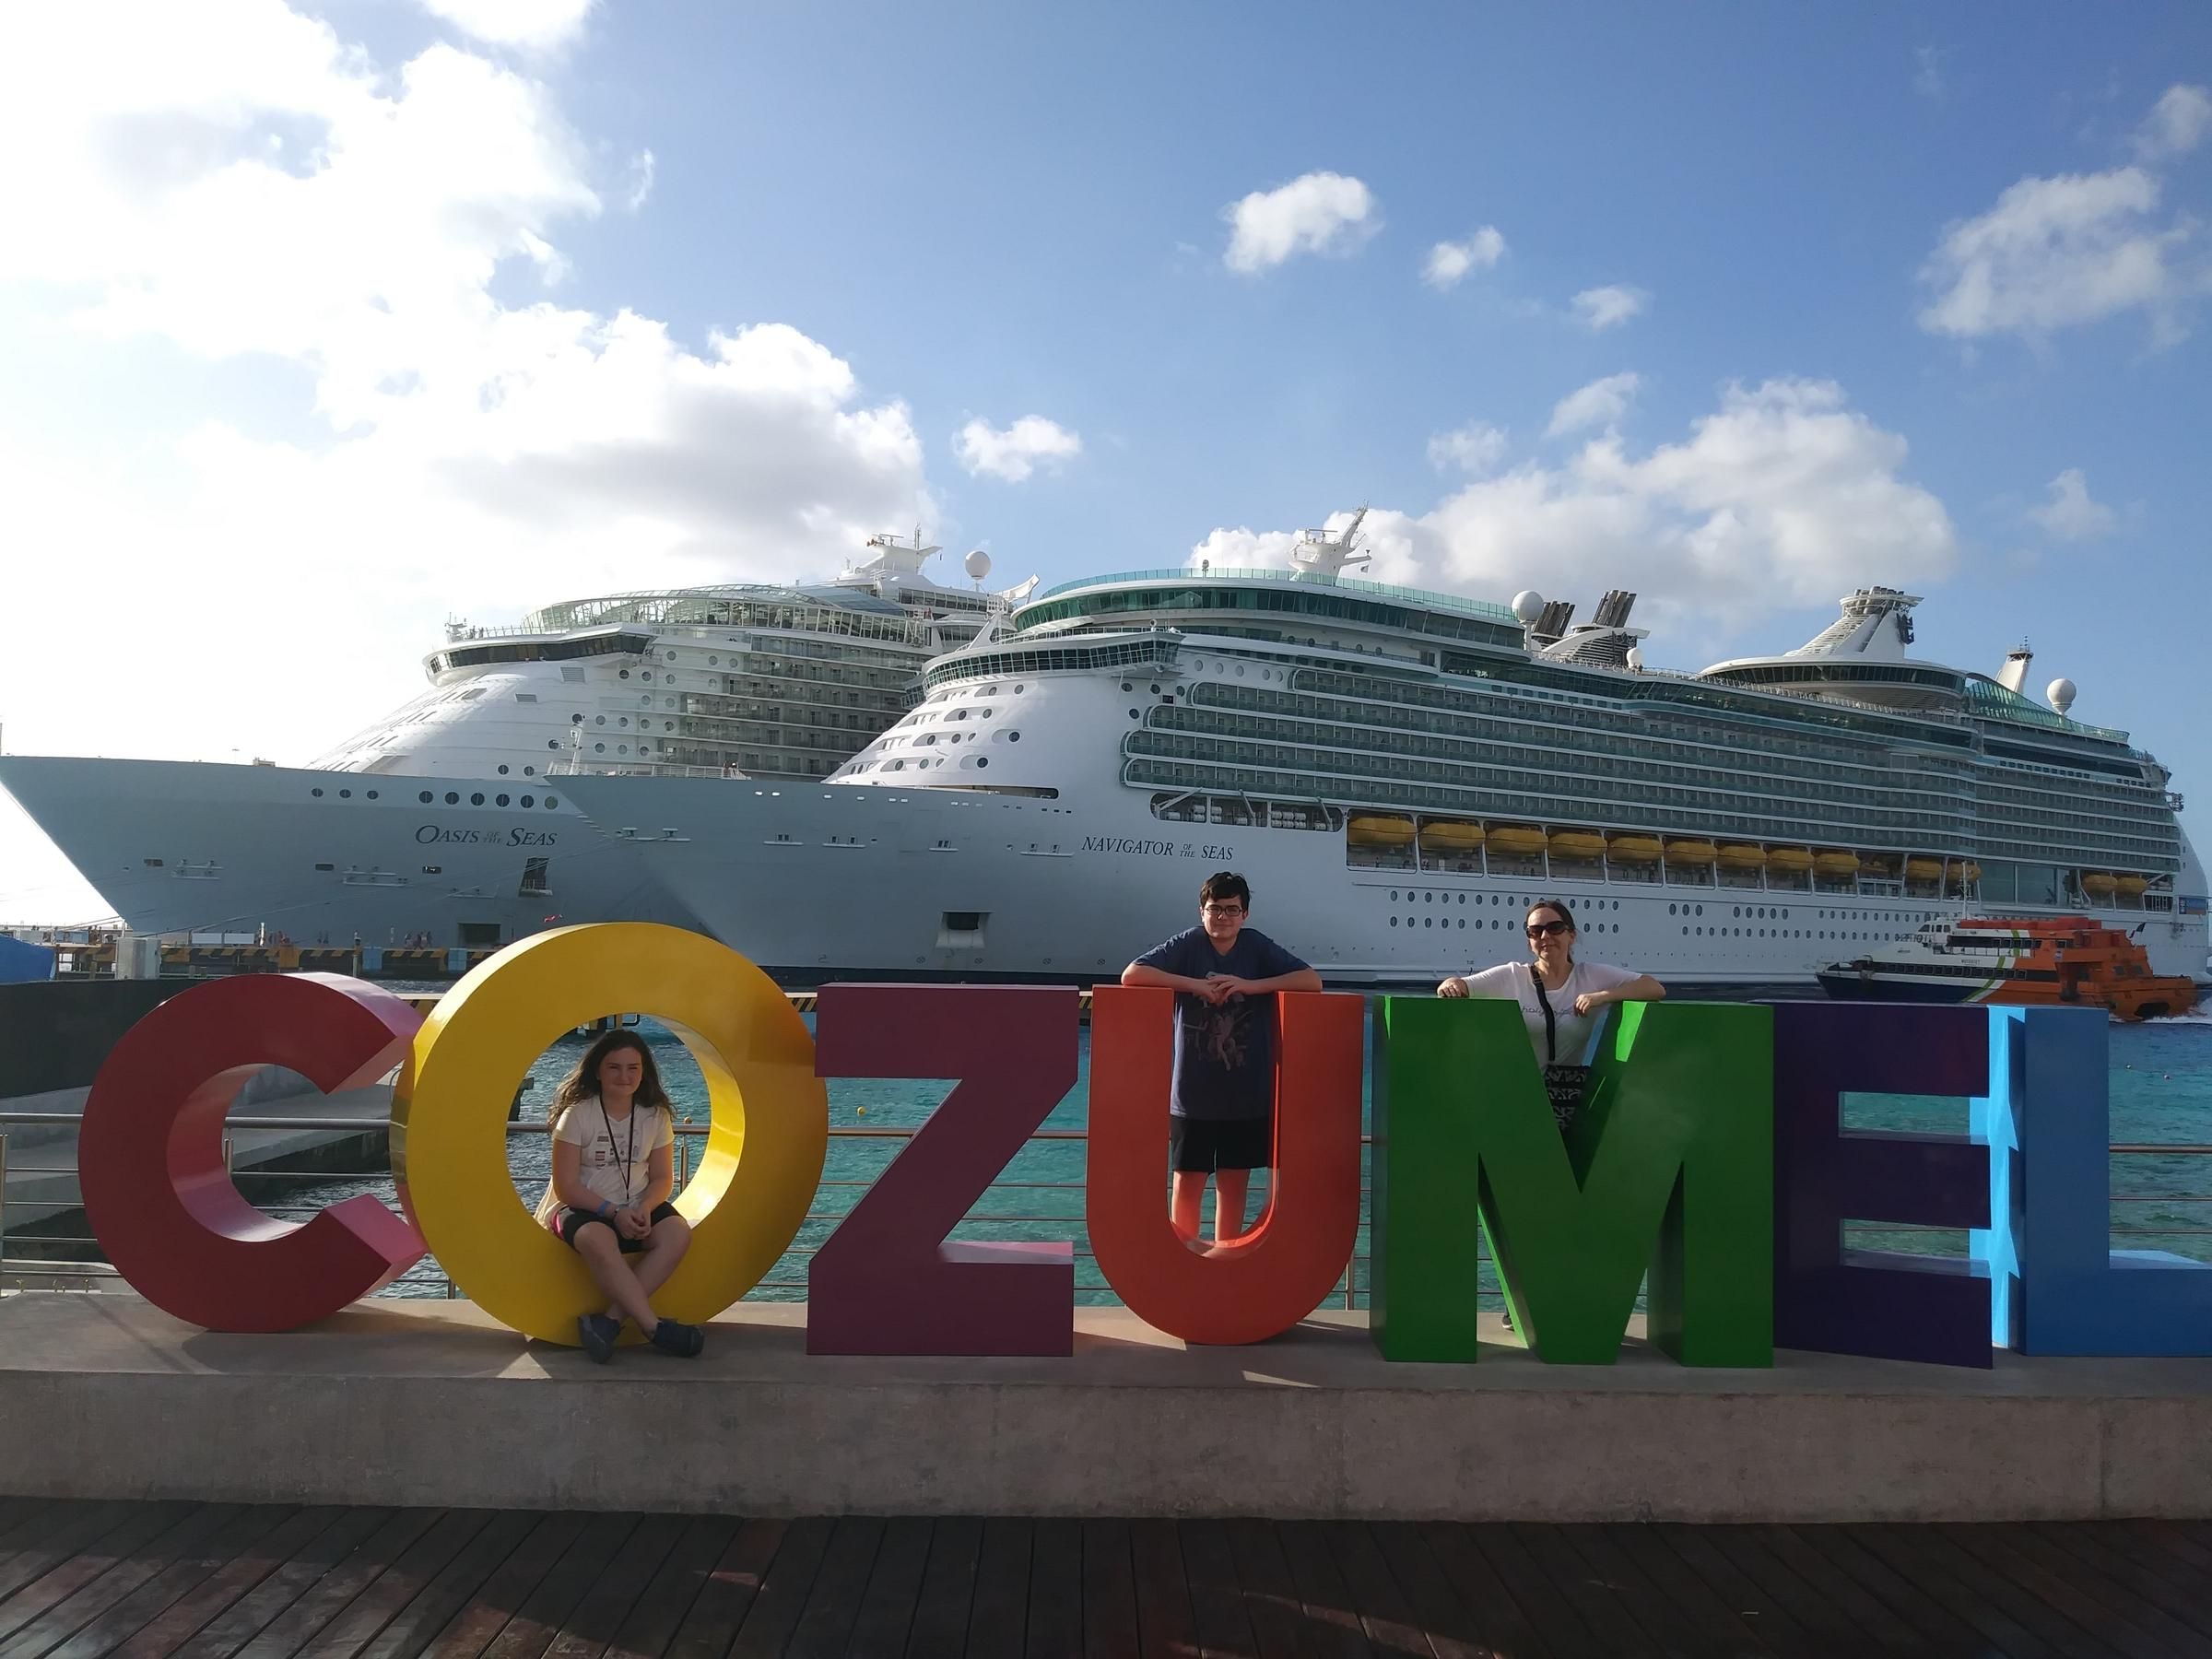 Three people posing with Cozumel sign with cruise ship in background